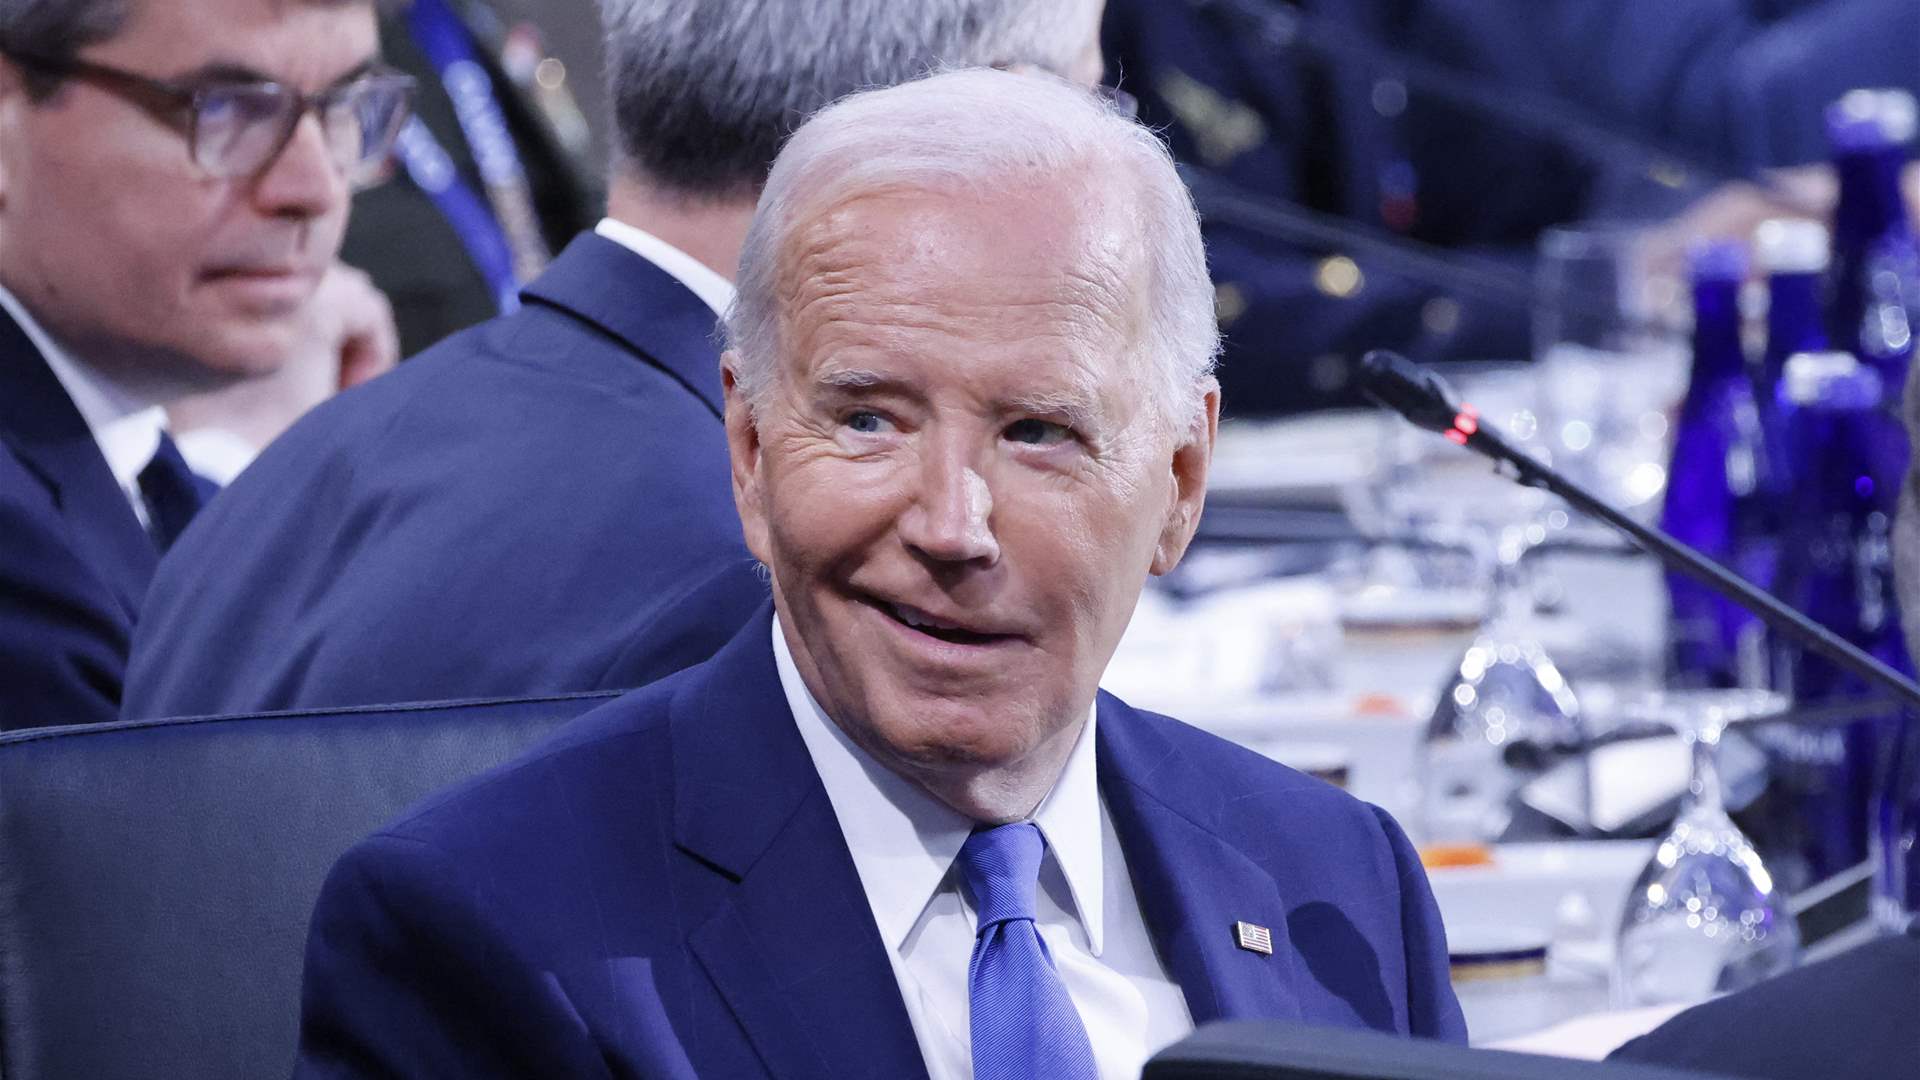 Biden insists he is staying in presidential race, mixes Harris with Trump